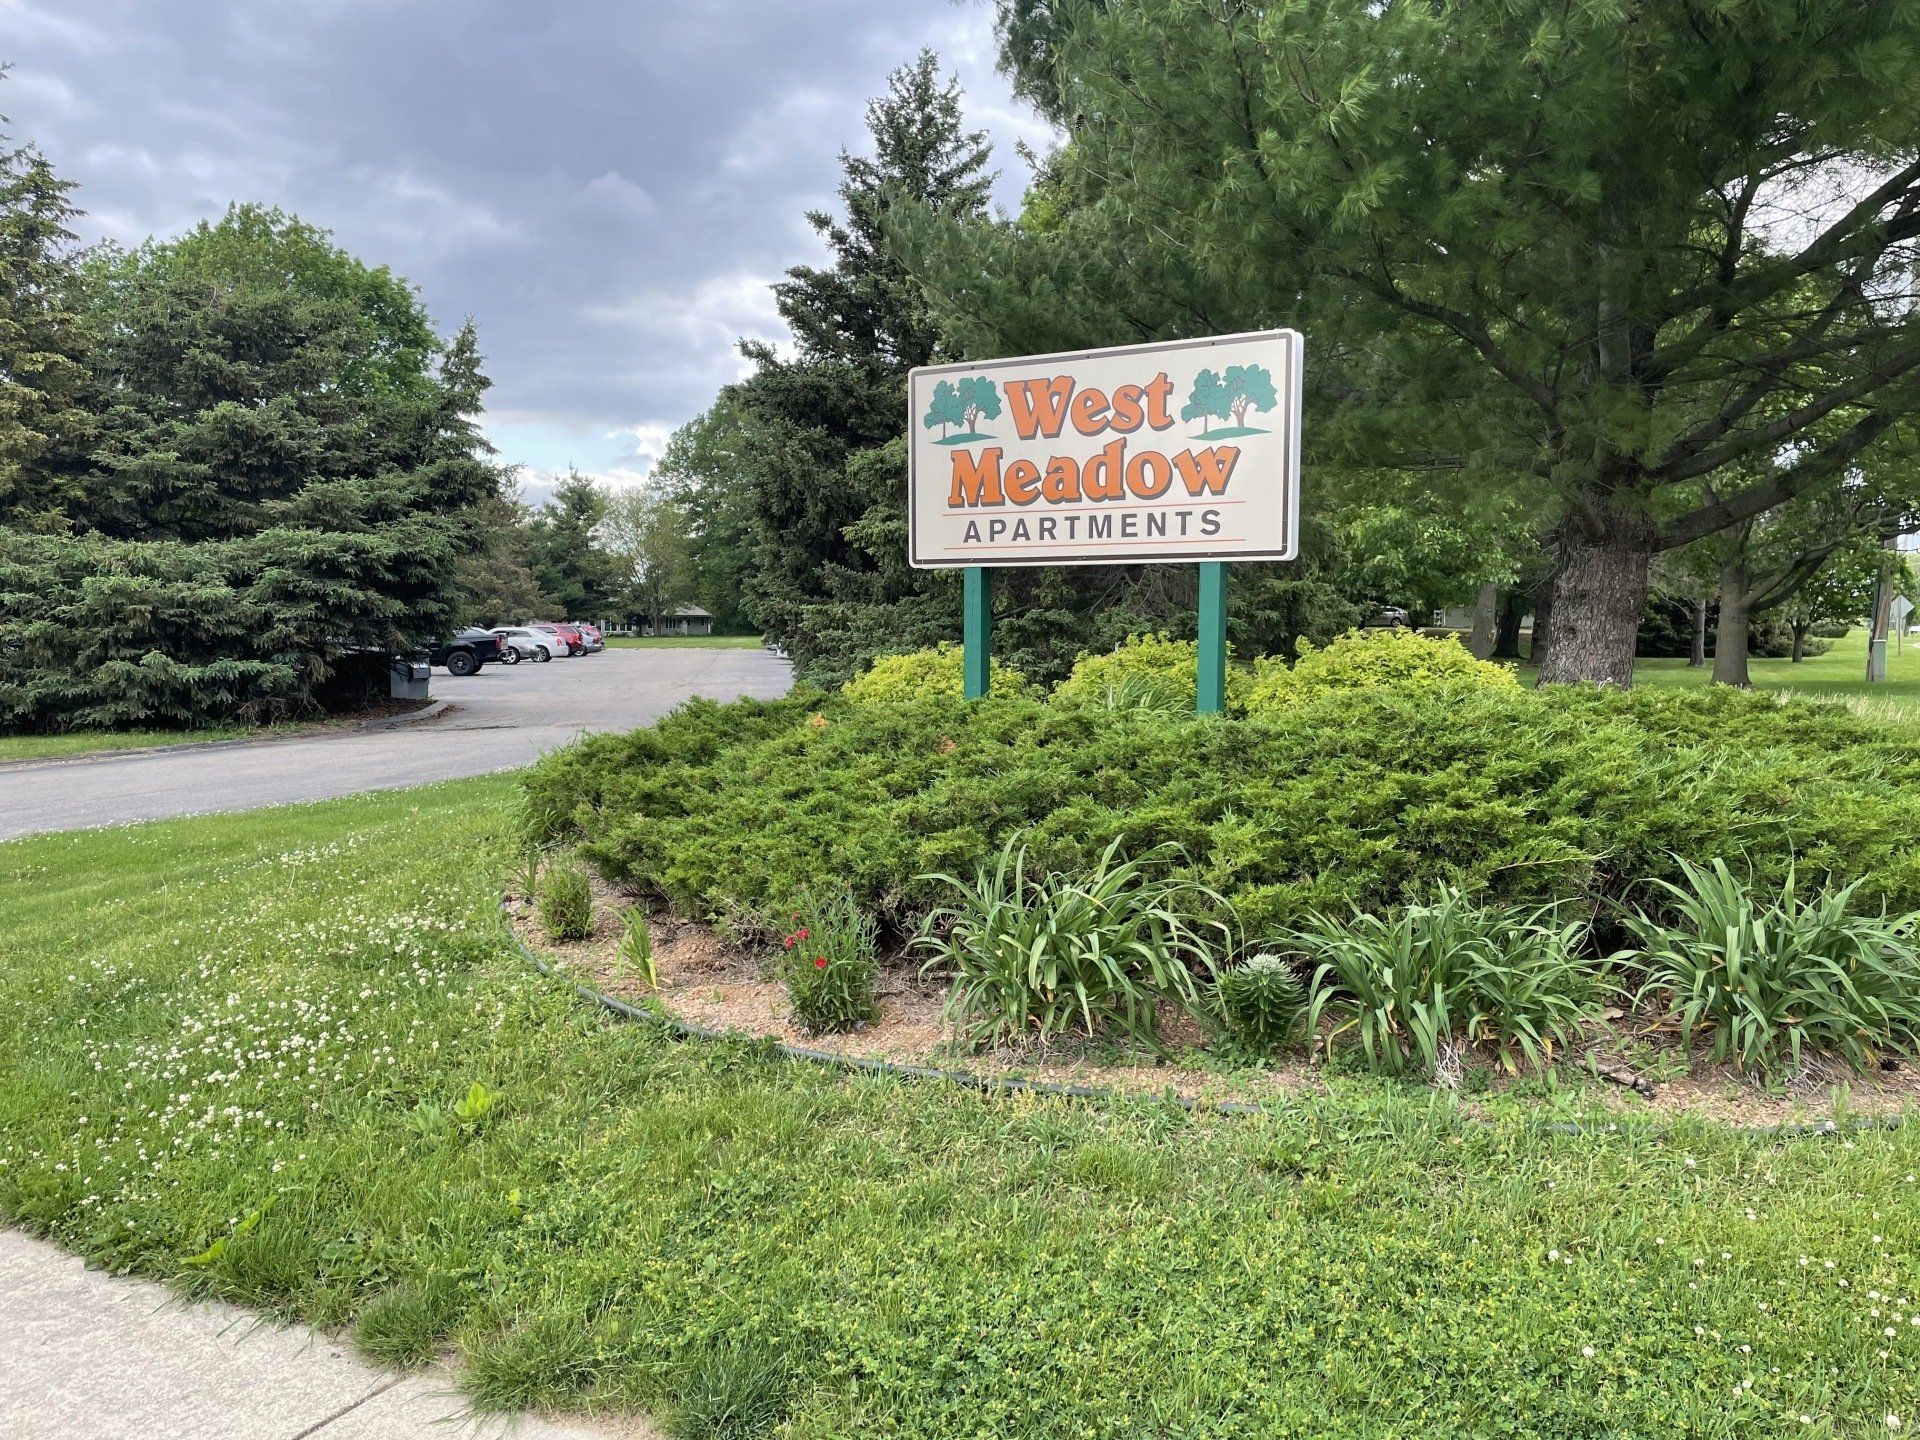 west meadow  Apartments sign